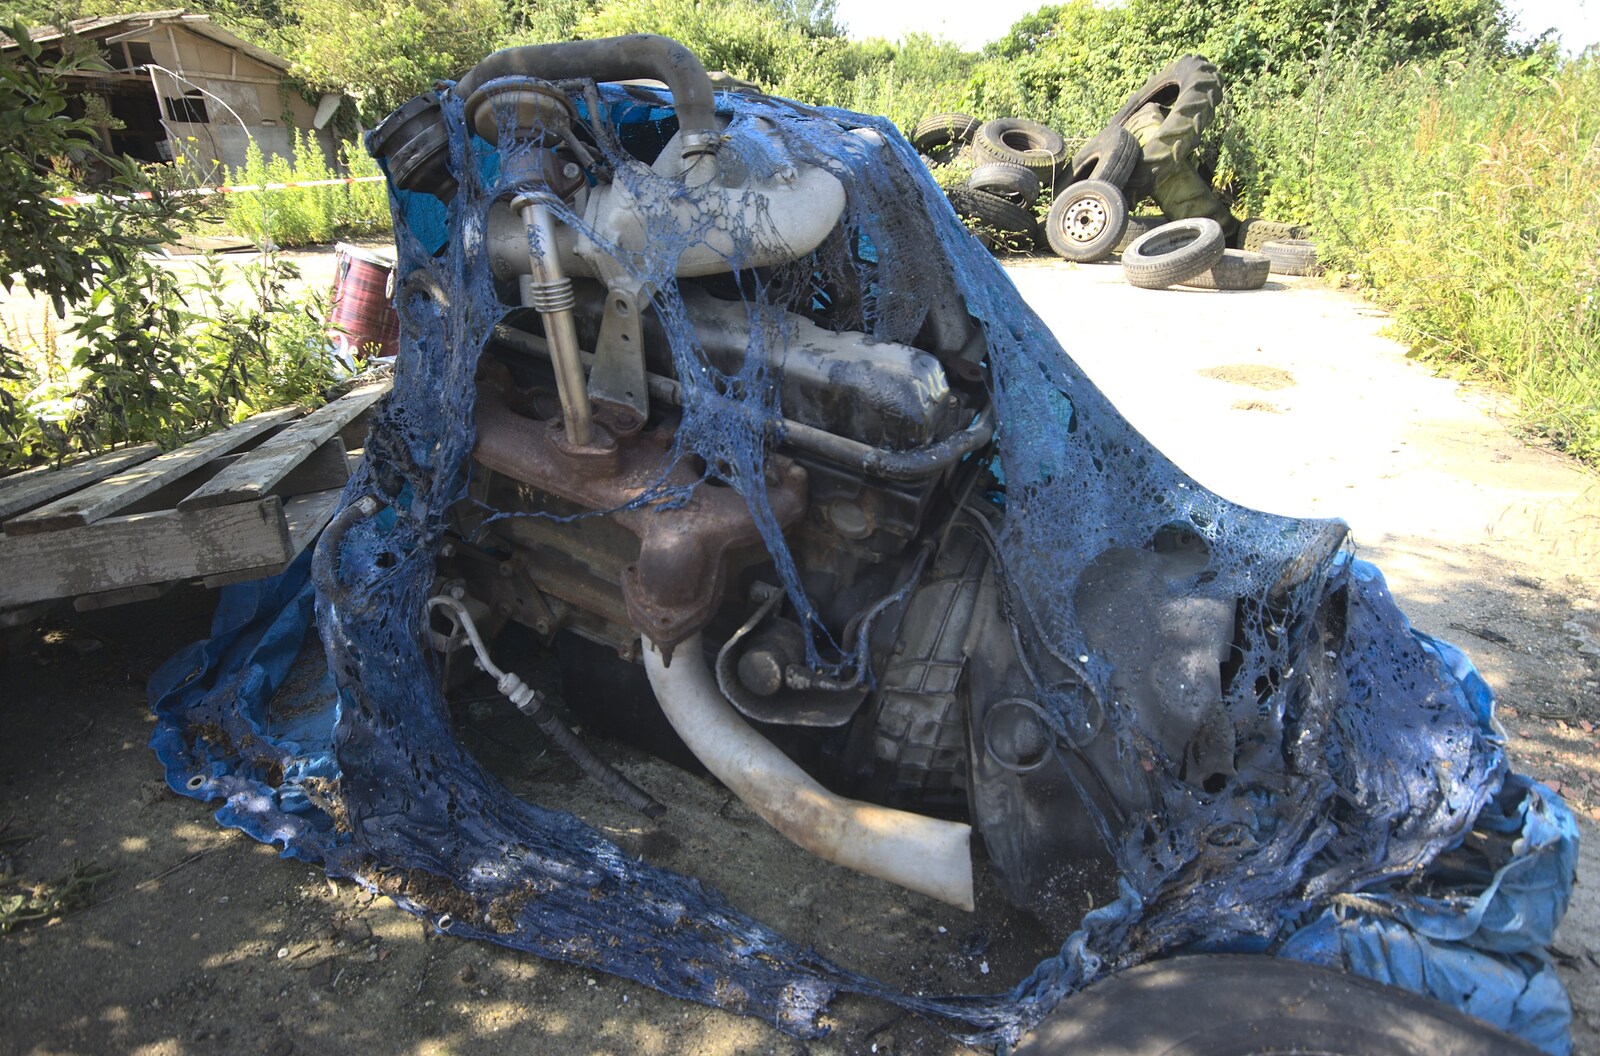 A nearby engine is covered in melted plastic from A Fire at Valley Farm, Thrandeston, Suffolk - 24th June 2009